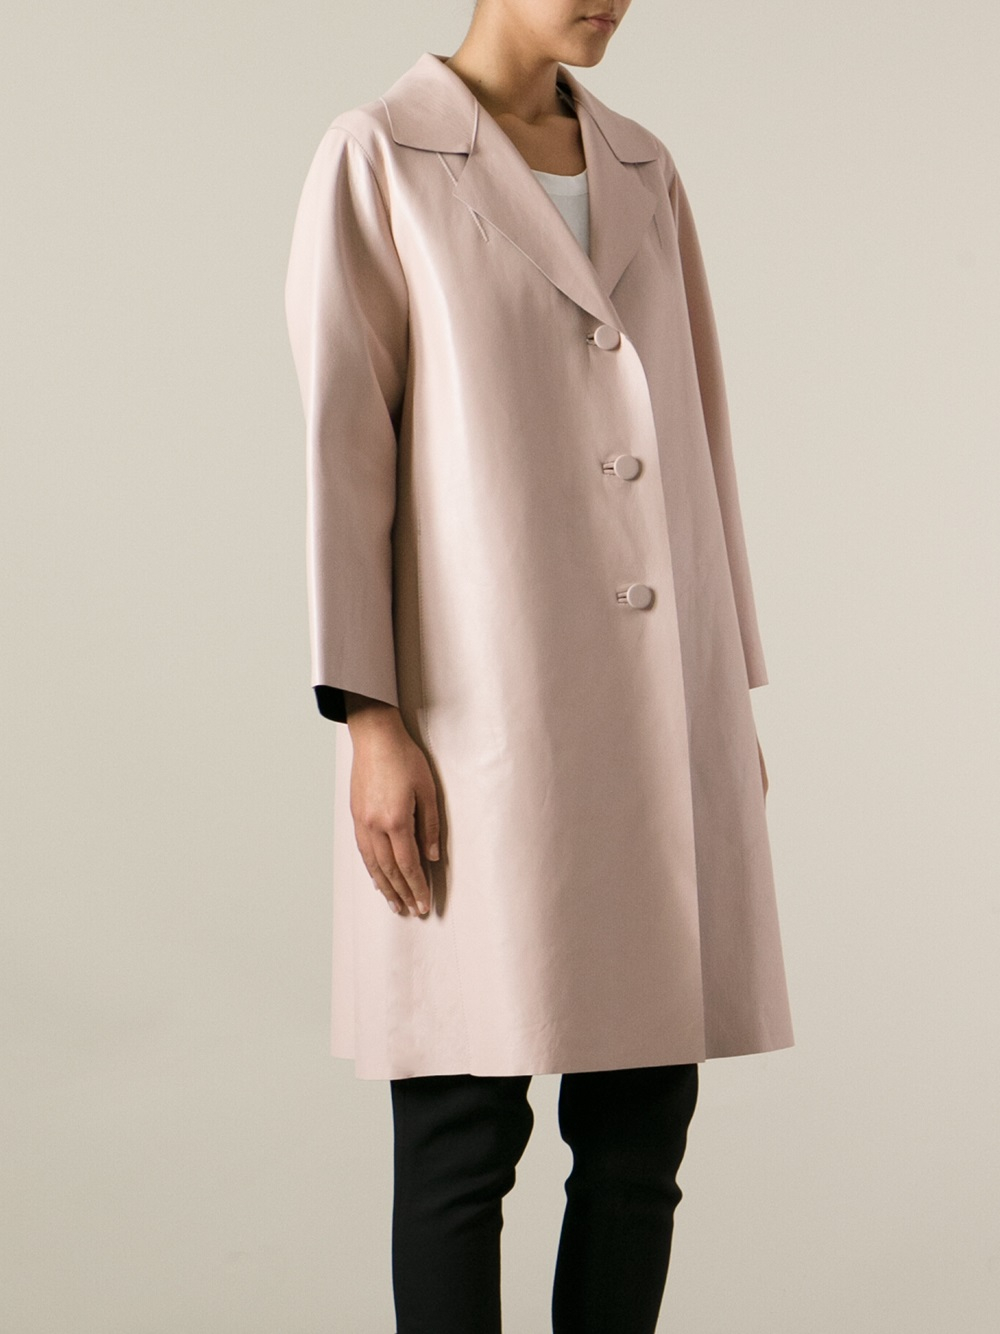 Marni Duster Coat in Pink & Purple (Pink) - Lyst